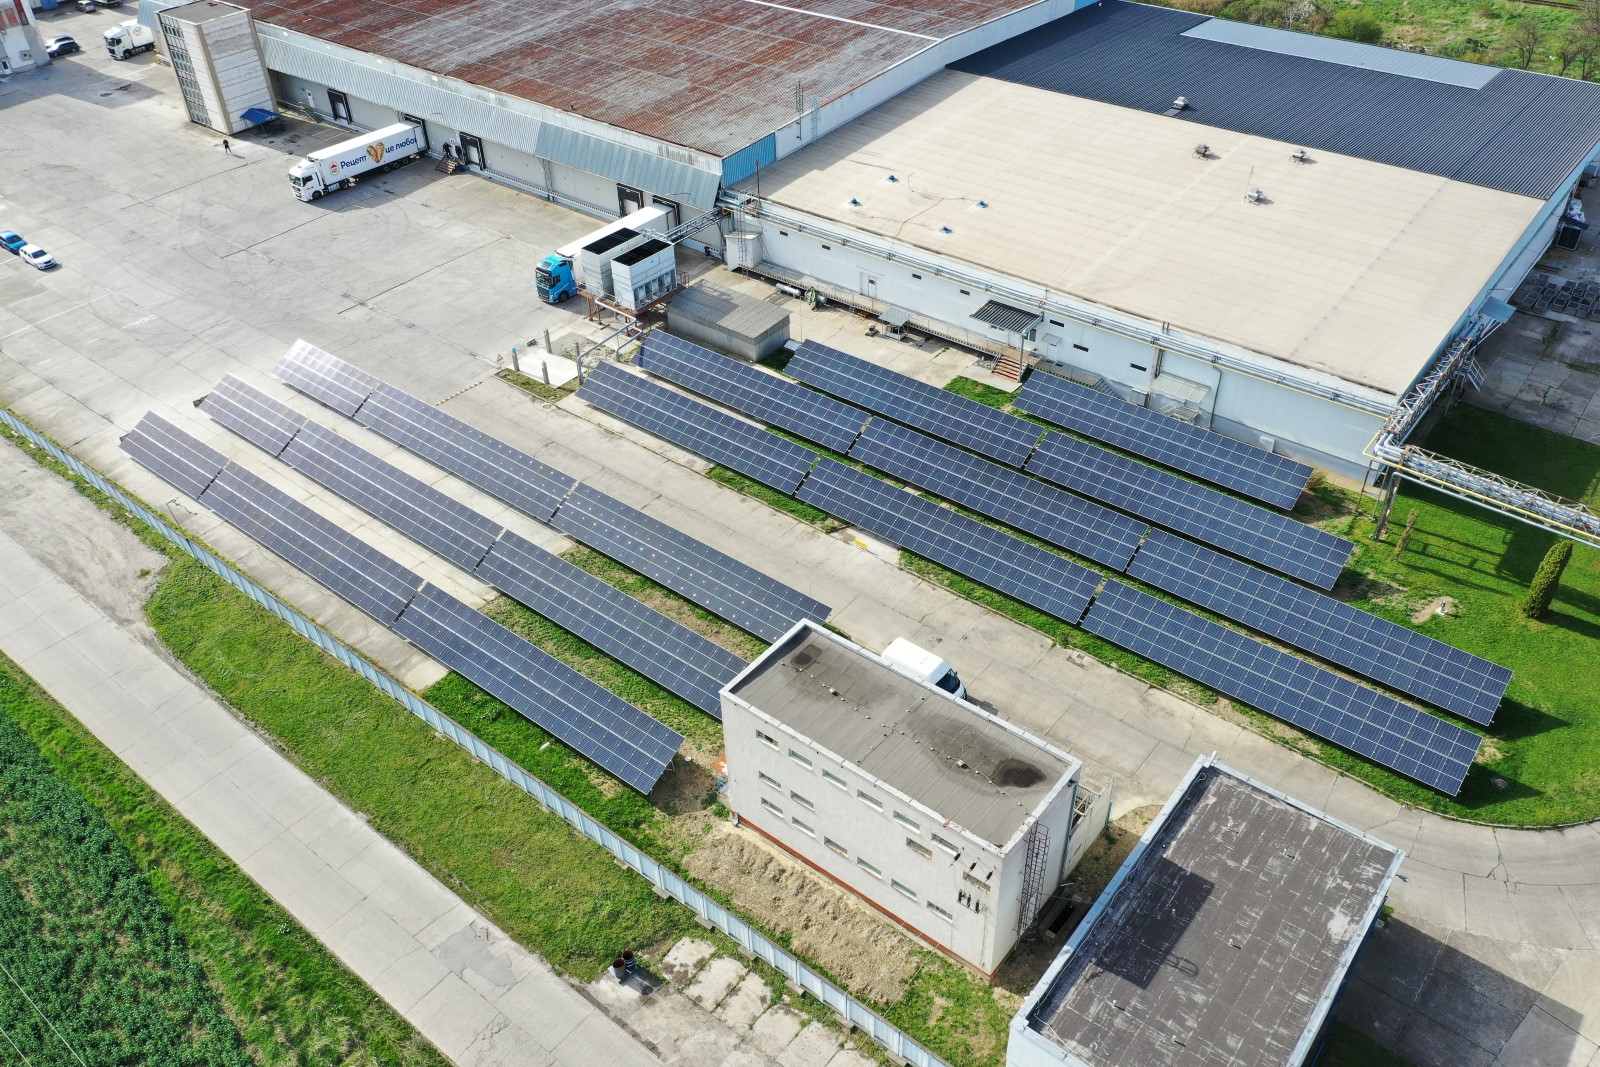 Design and delivery of a 300,3 kWp photovoltaic power plant - Ground installation